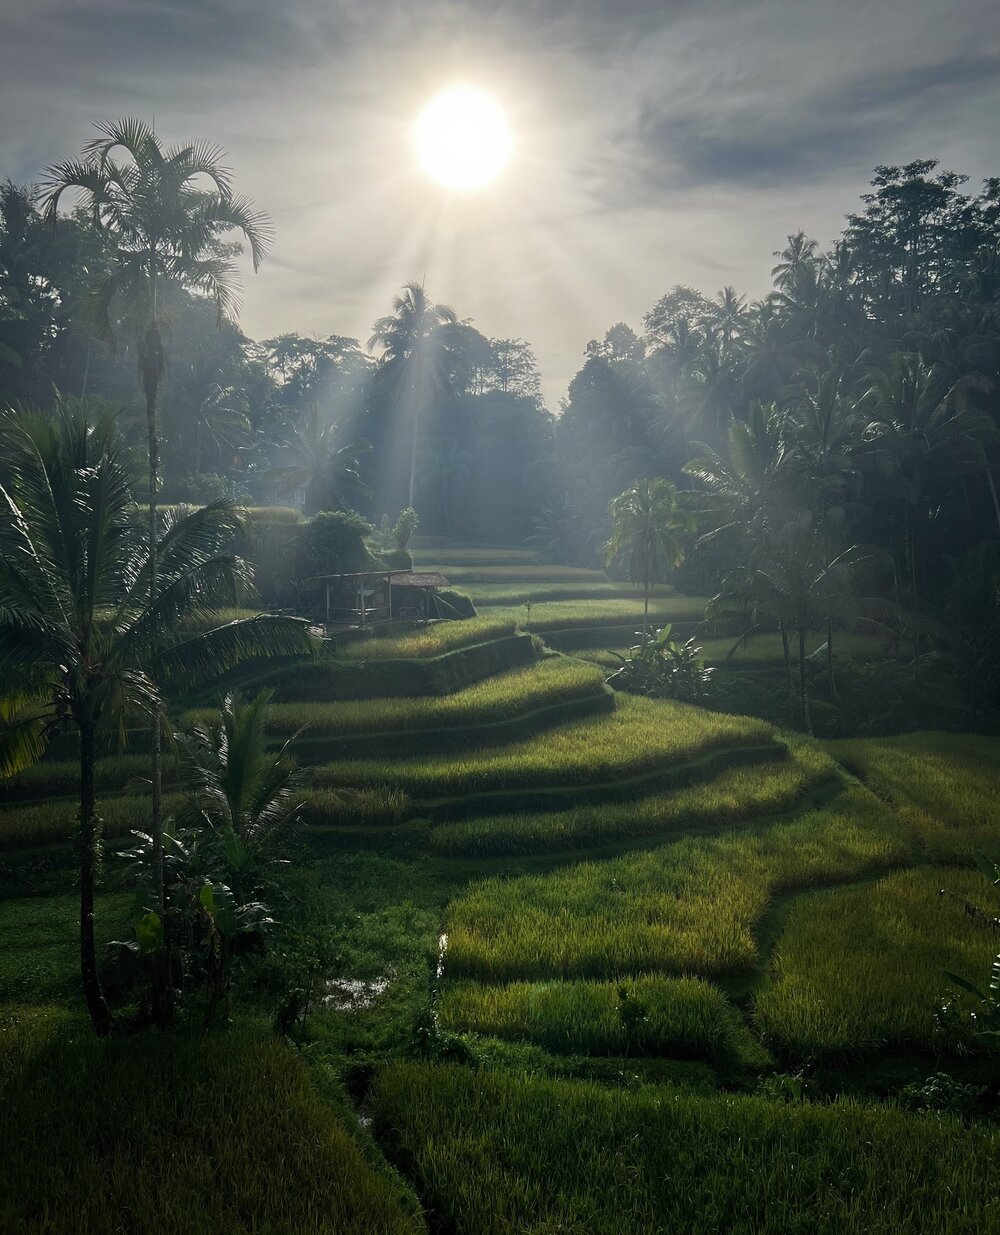 Bali's rice fields can be stunning and mesmerizing. 🌾🌴 The only catch is you'll need to get up early and know where to go for a sight like this. You must understand that many places you see of Bali on Social Media are commercialized and synthetical